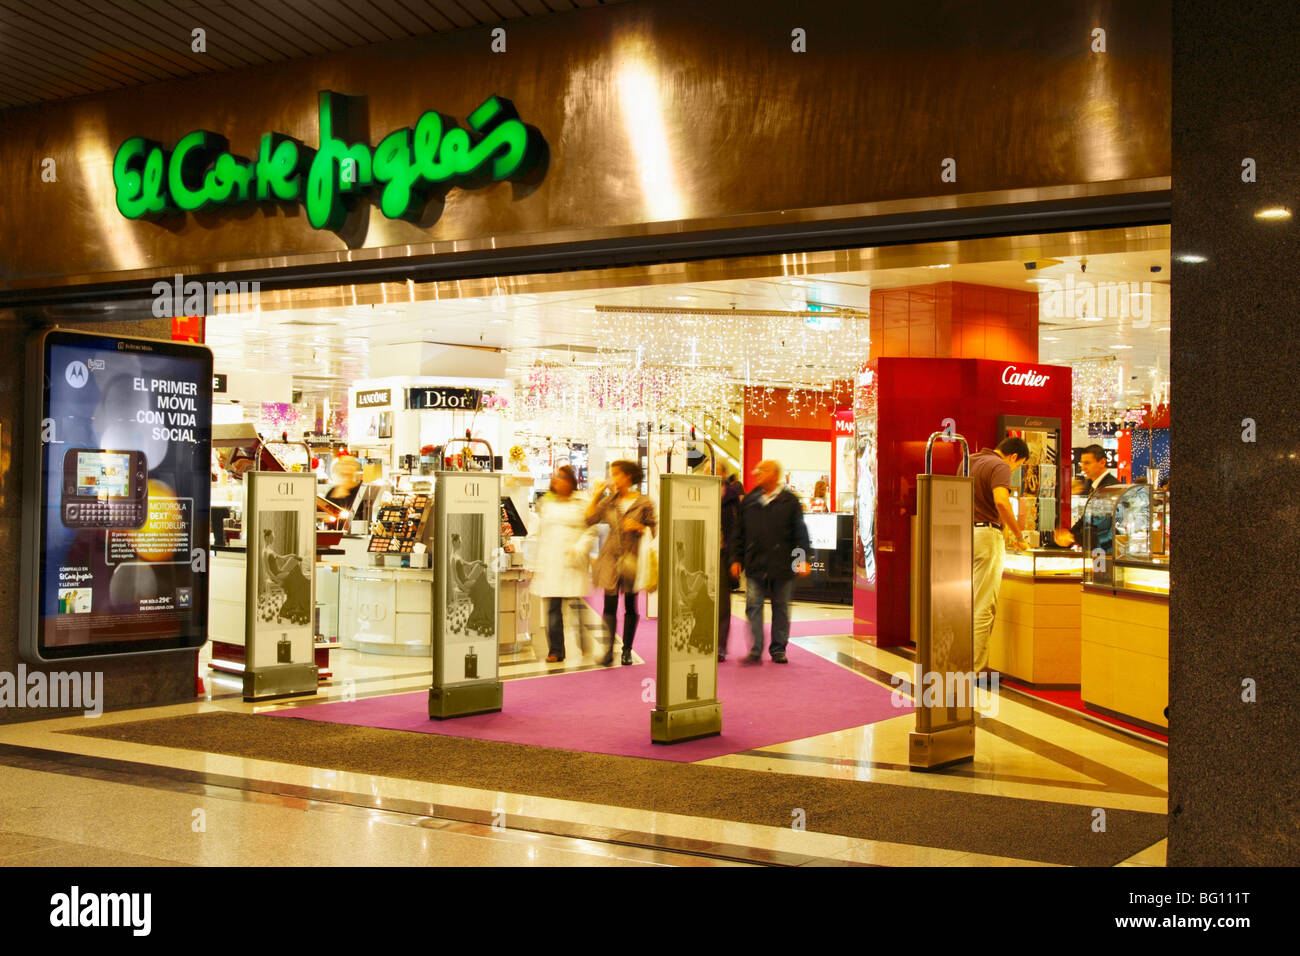 Entrance to 'El Corte Inglés' department store in Spain at christmas. Stock Photo